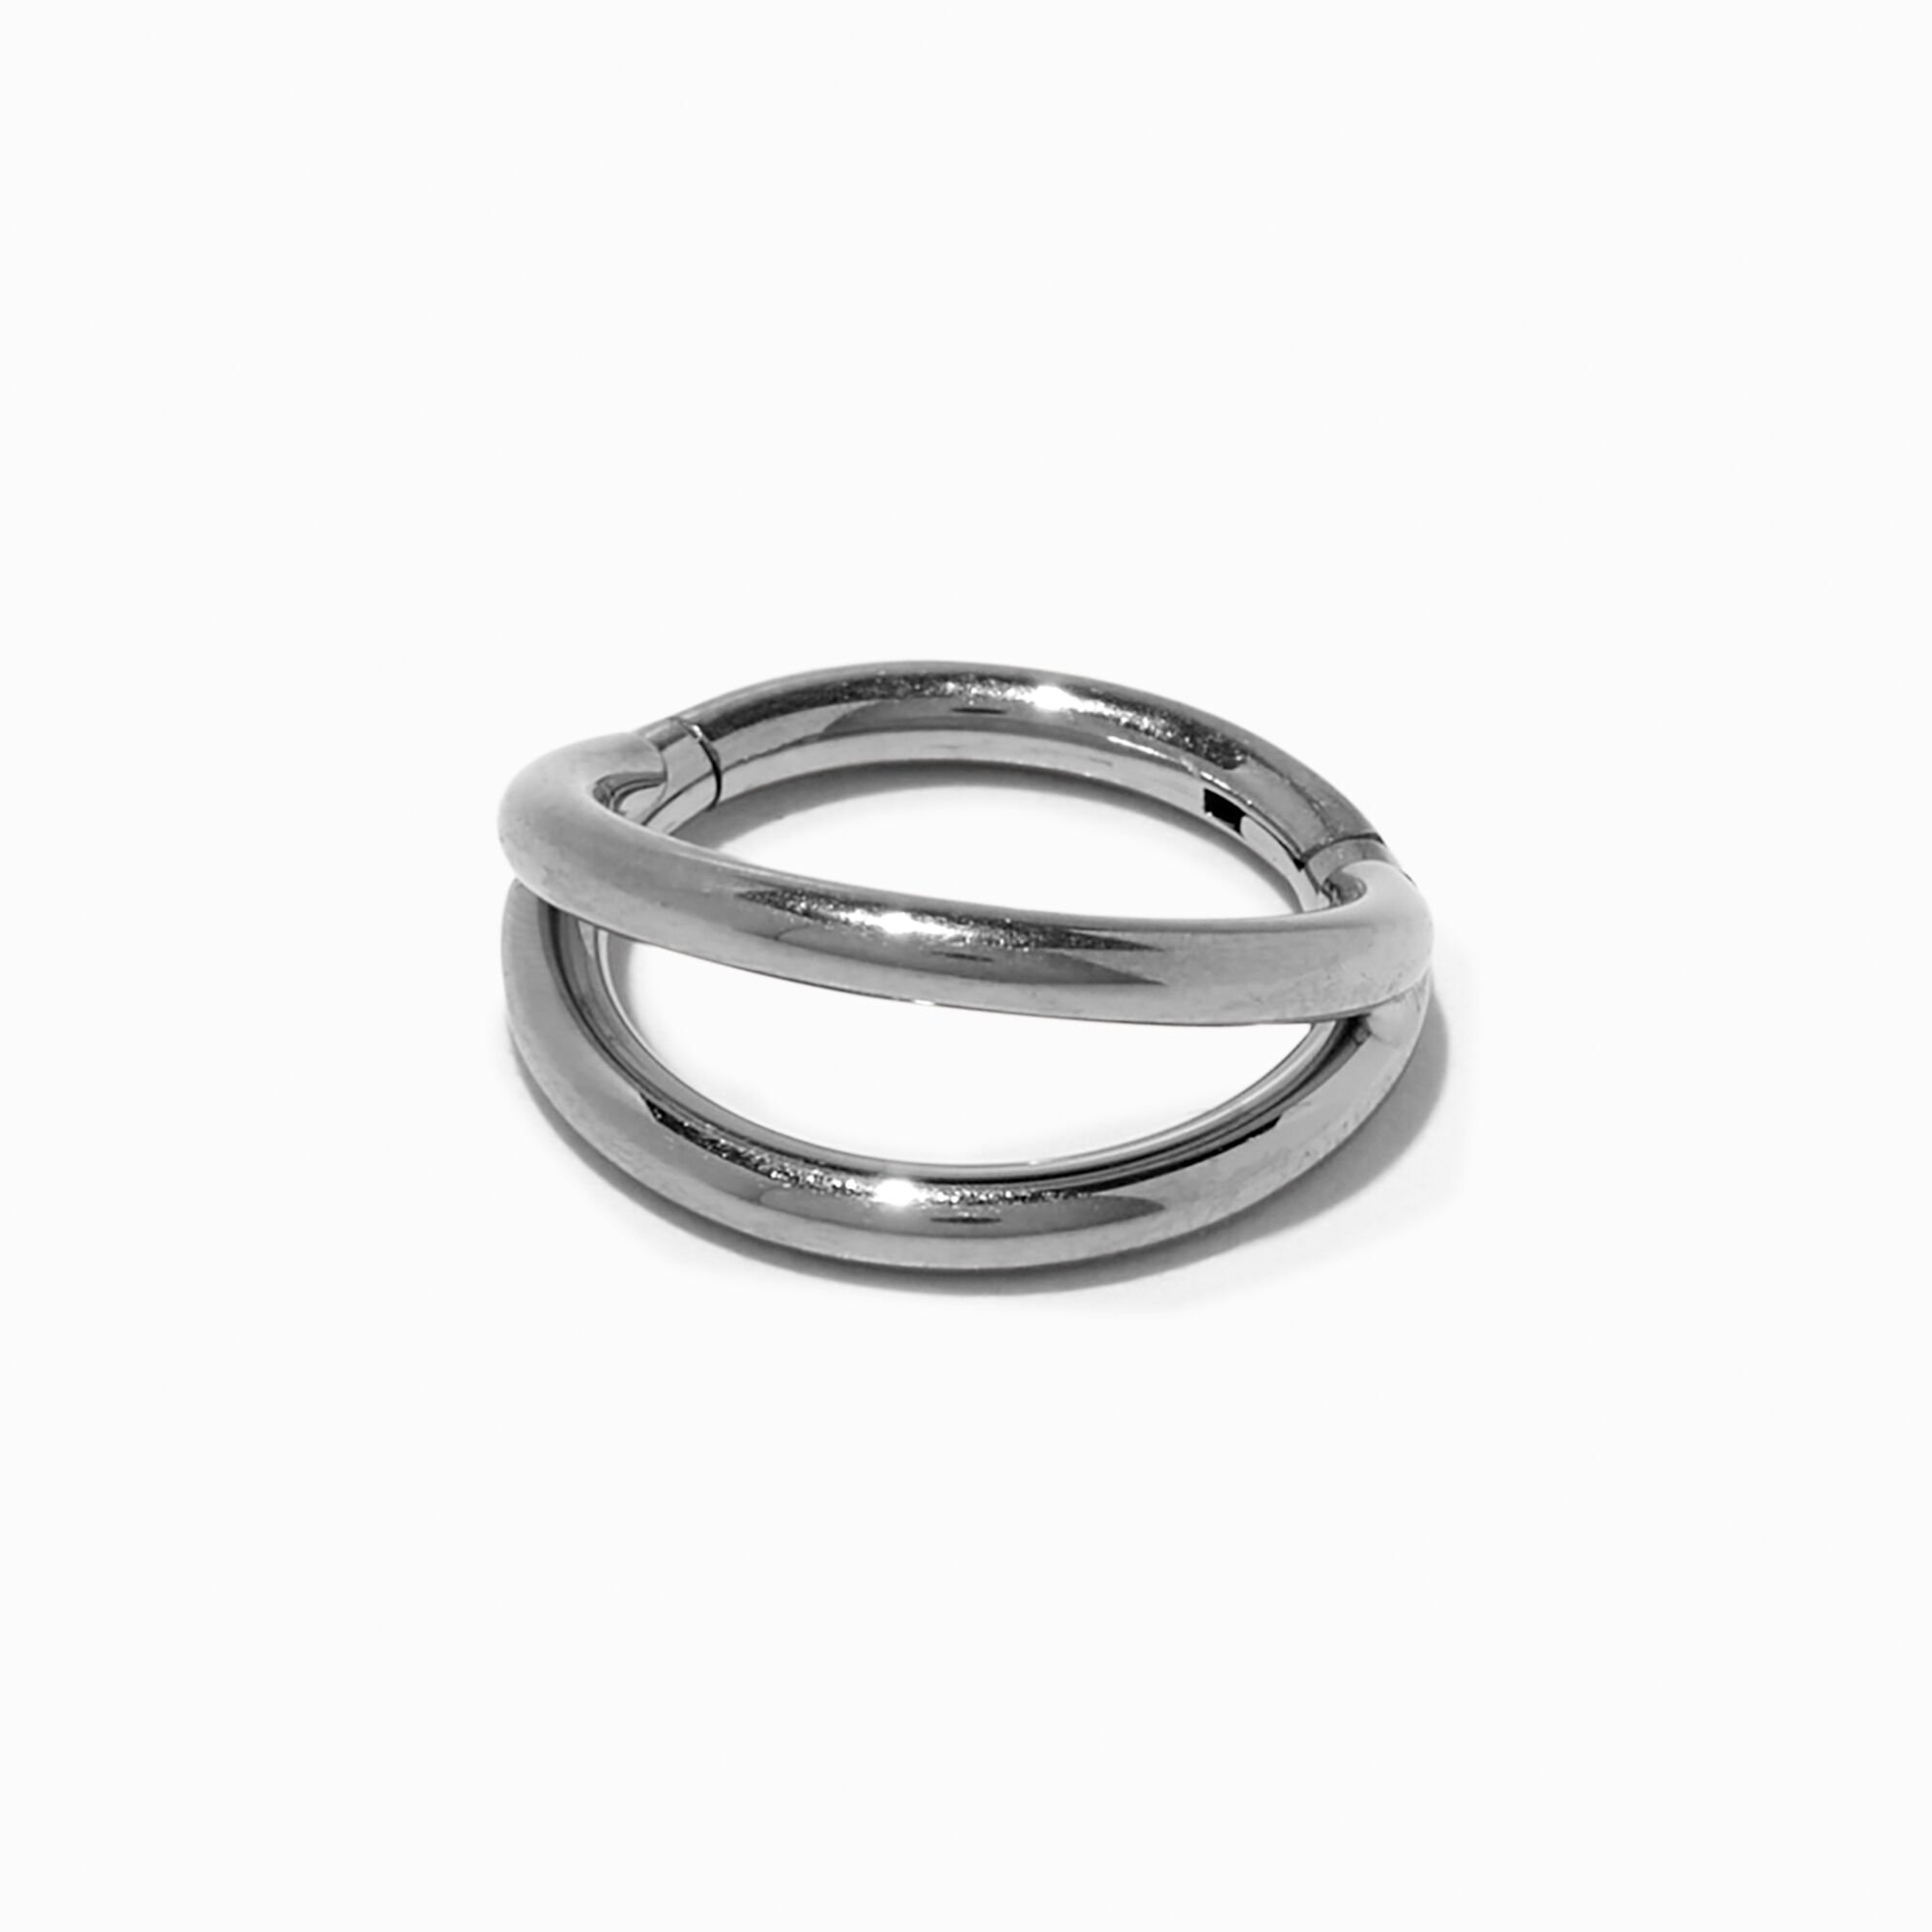 Claire's 16g Double Row Titanium Nose Ring | Silver